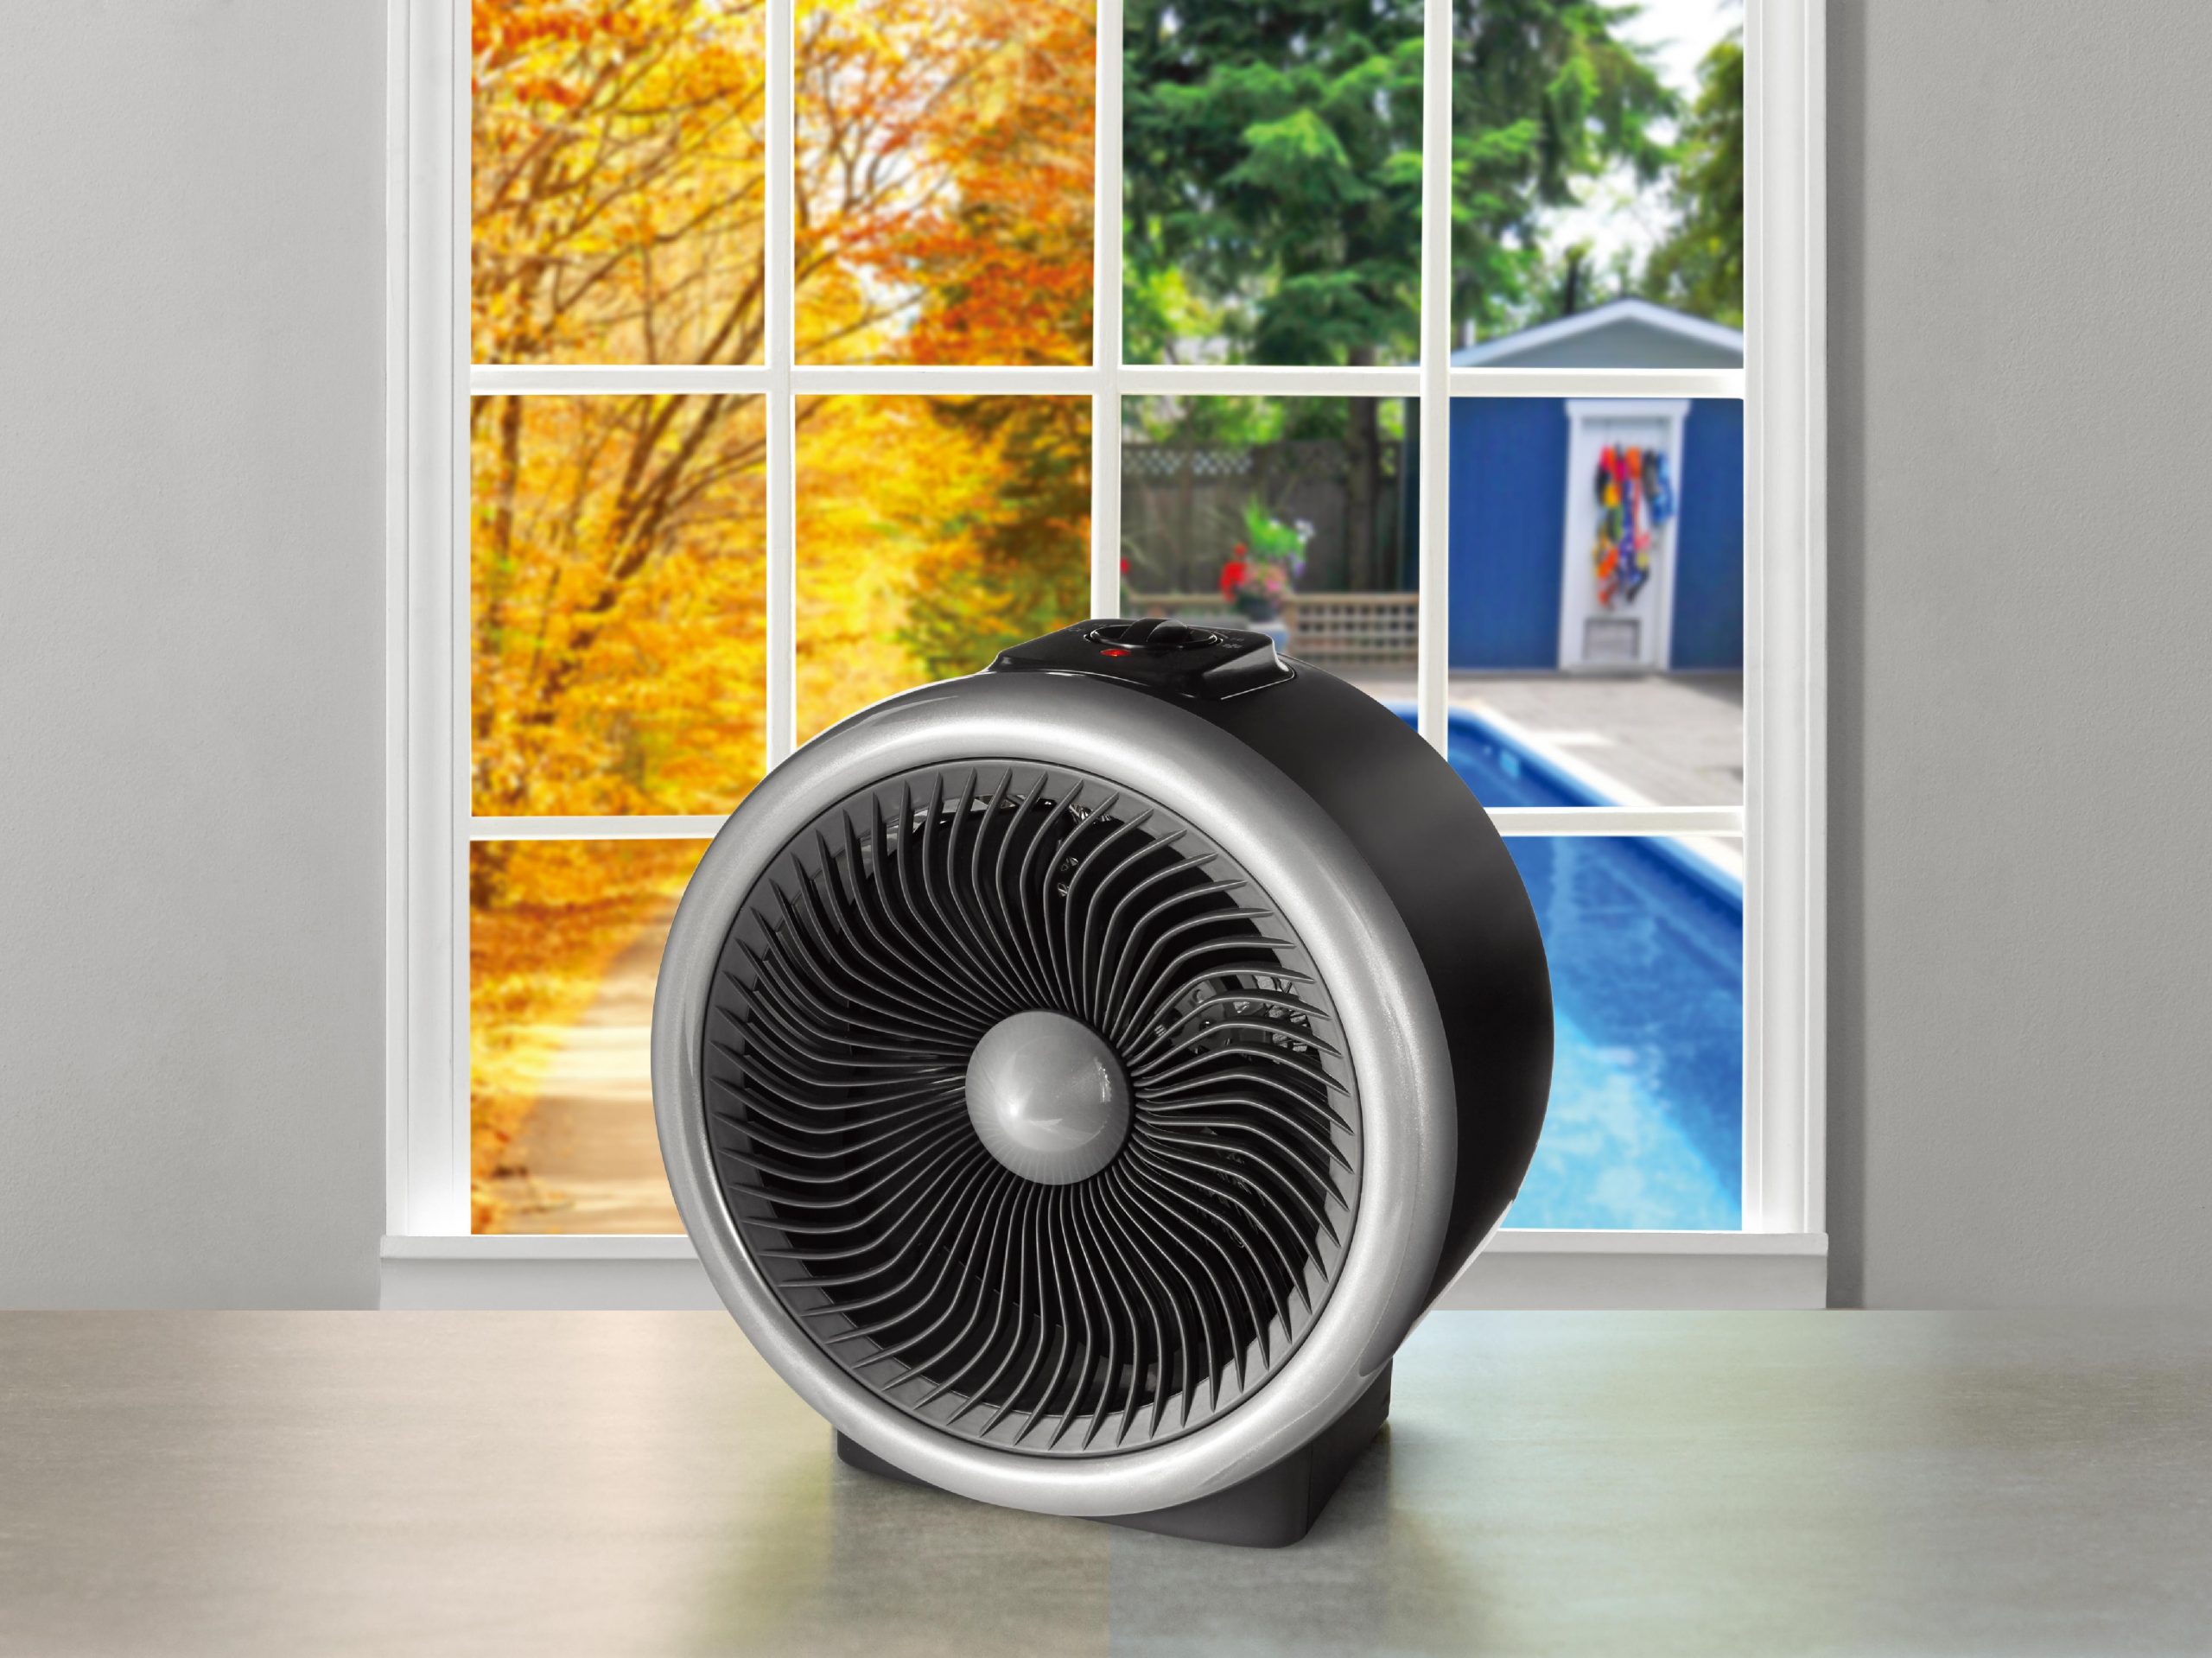 Mainstays 2 In 1 Portable Heater Fan 900 1500w Indoor Black throughout proportions 4621 X 3464